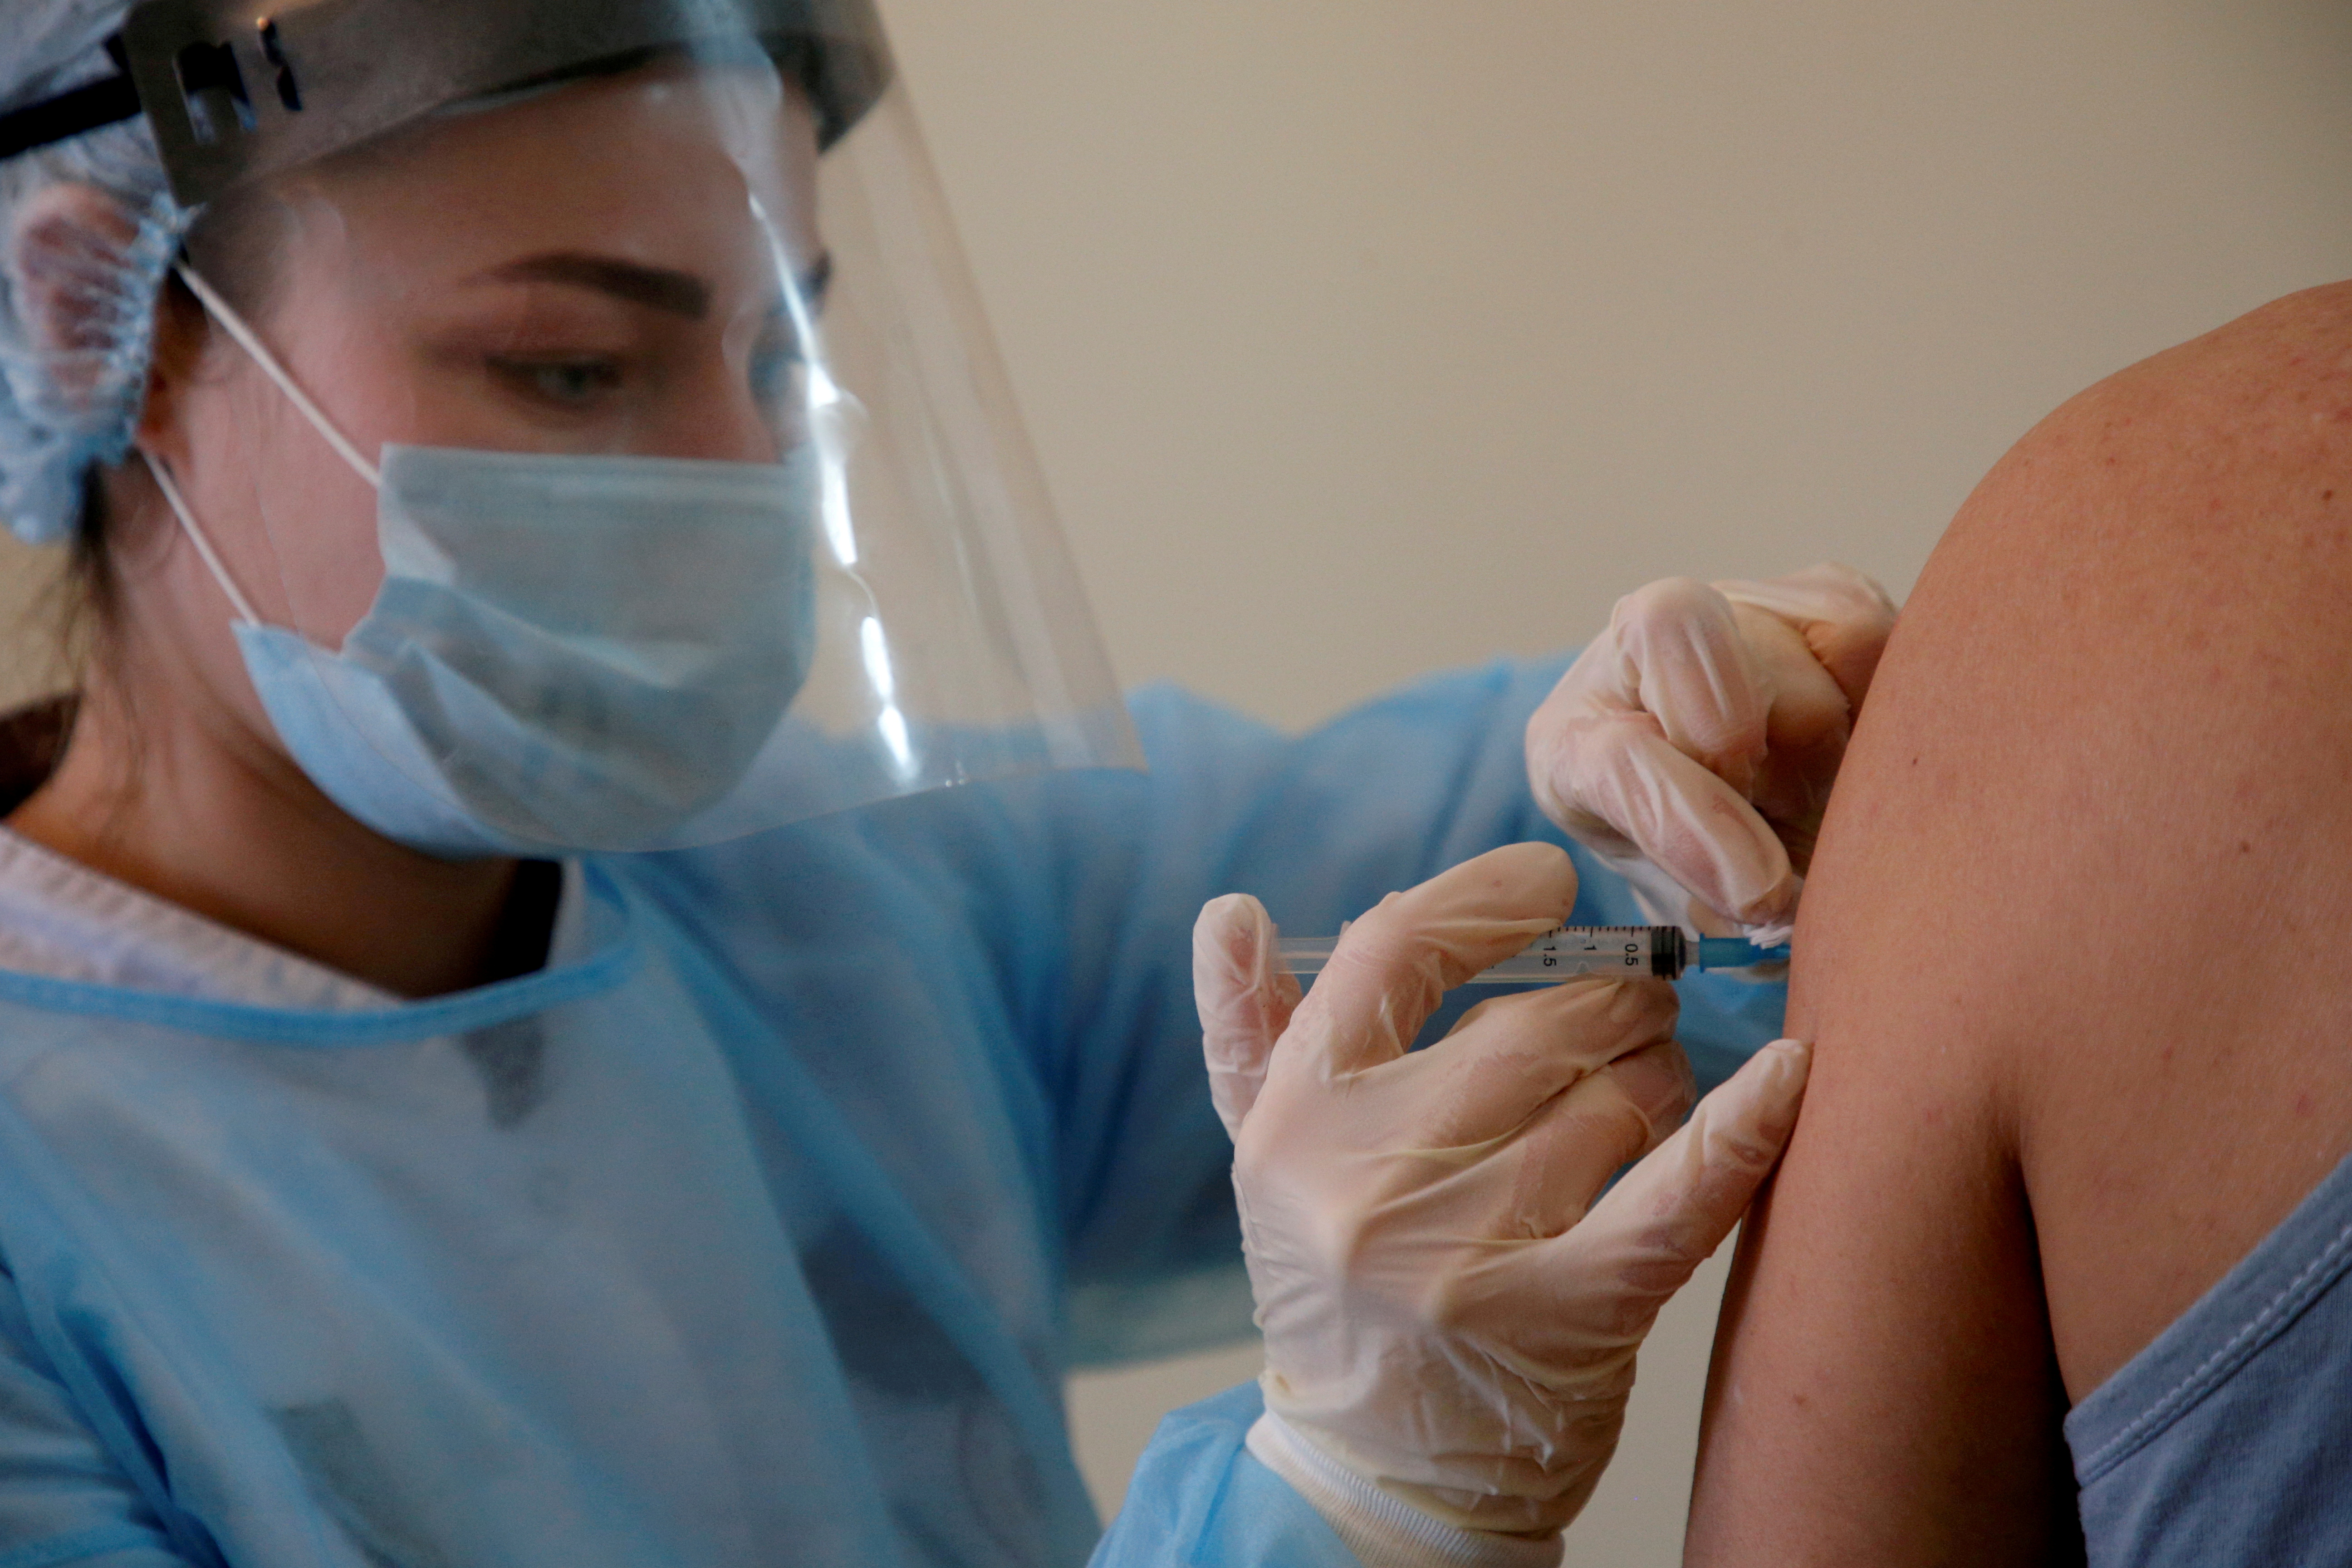 A person receives an injection with Sputnik V (Gam-COVID-Vac) vaccine against the coronavirus disease (COVID-19) in Donskoye